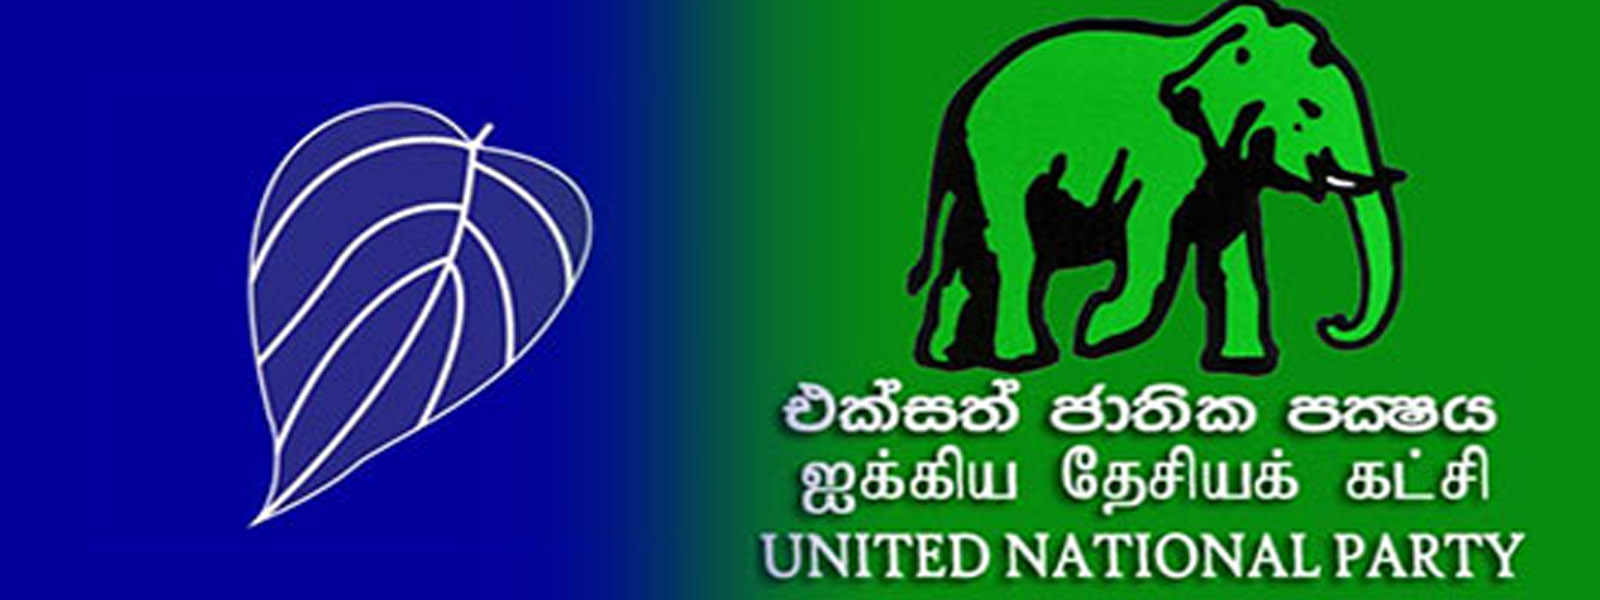 SLFP, UPFA to attend decisive meeting today